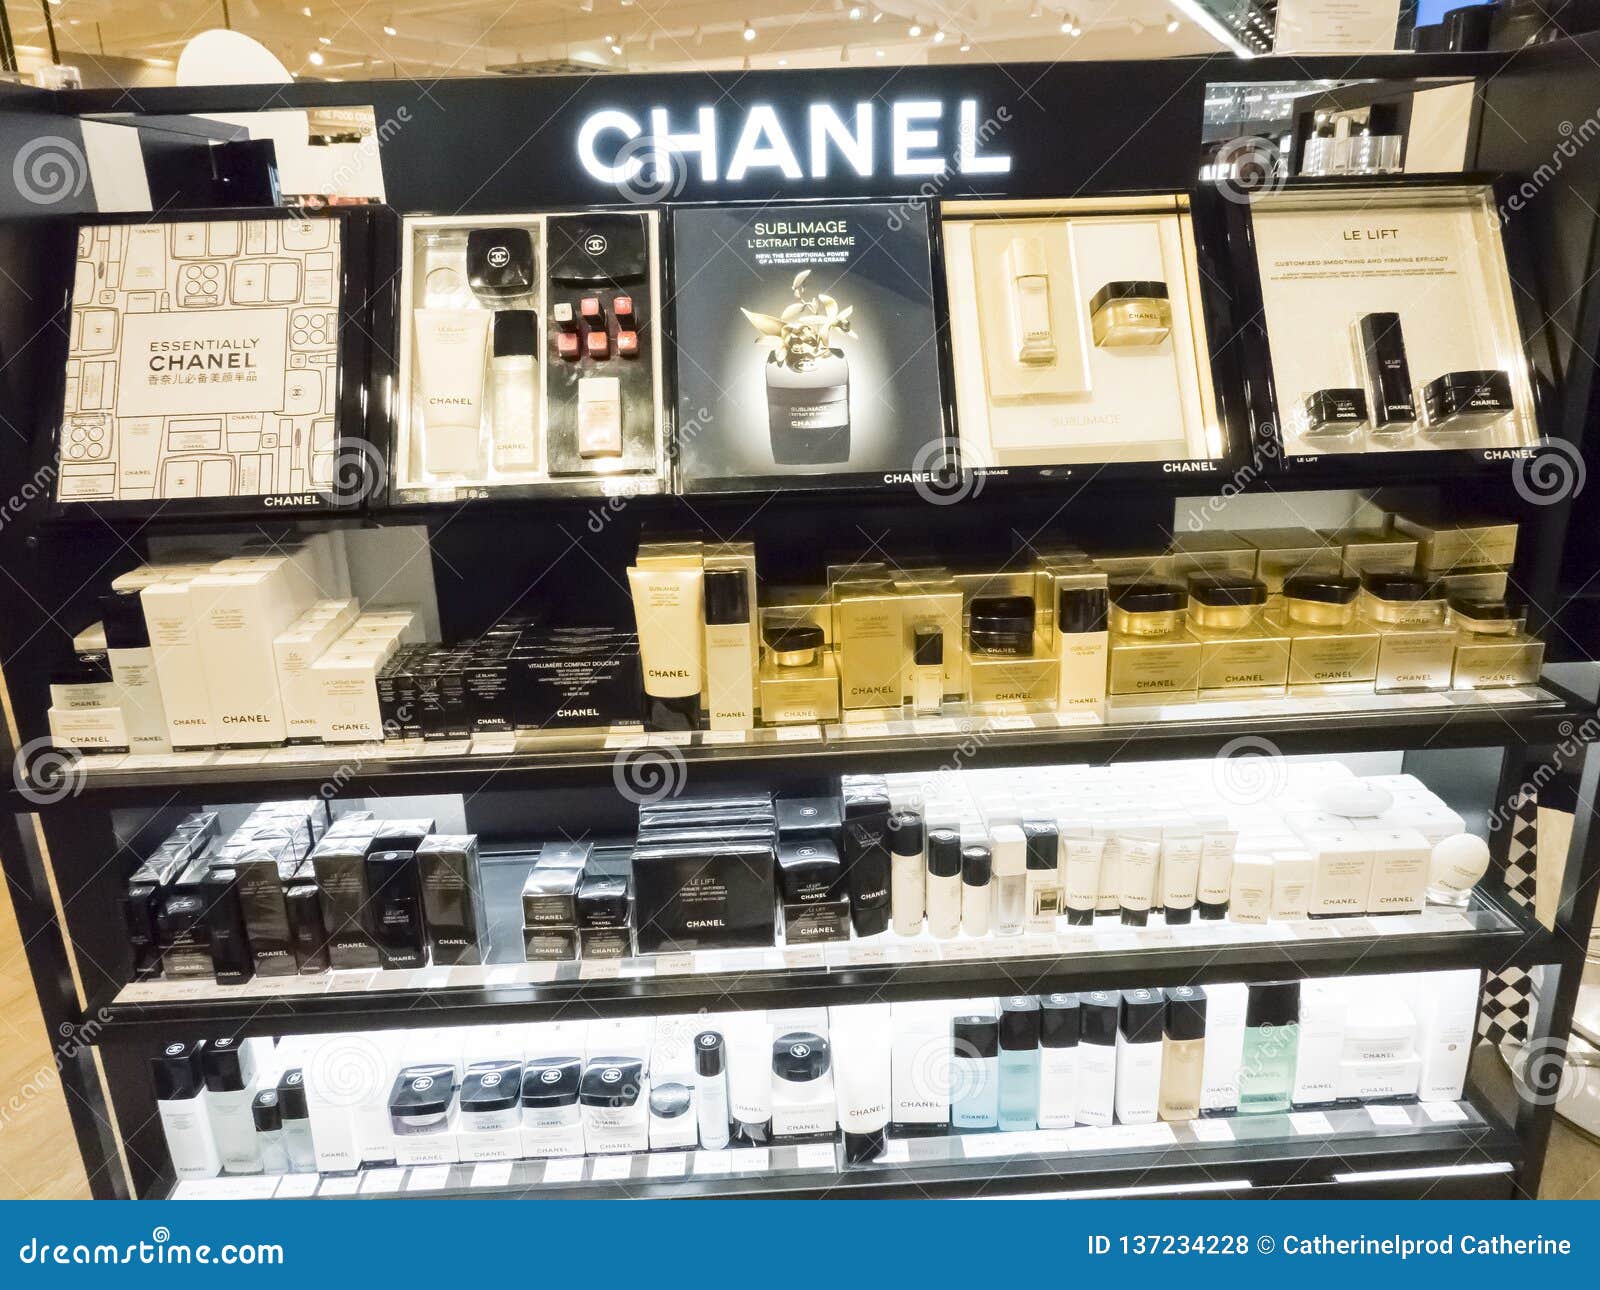 Chanel French Luxury Brand Perfume in Duty Free Store Shelf Editorial ...